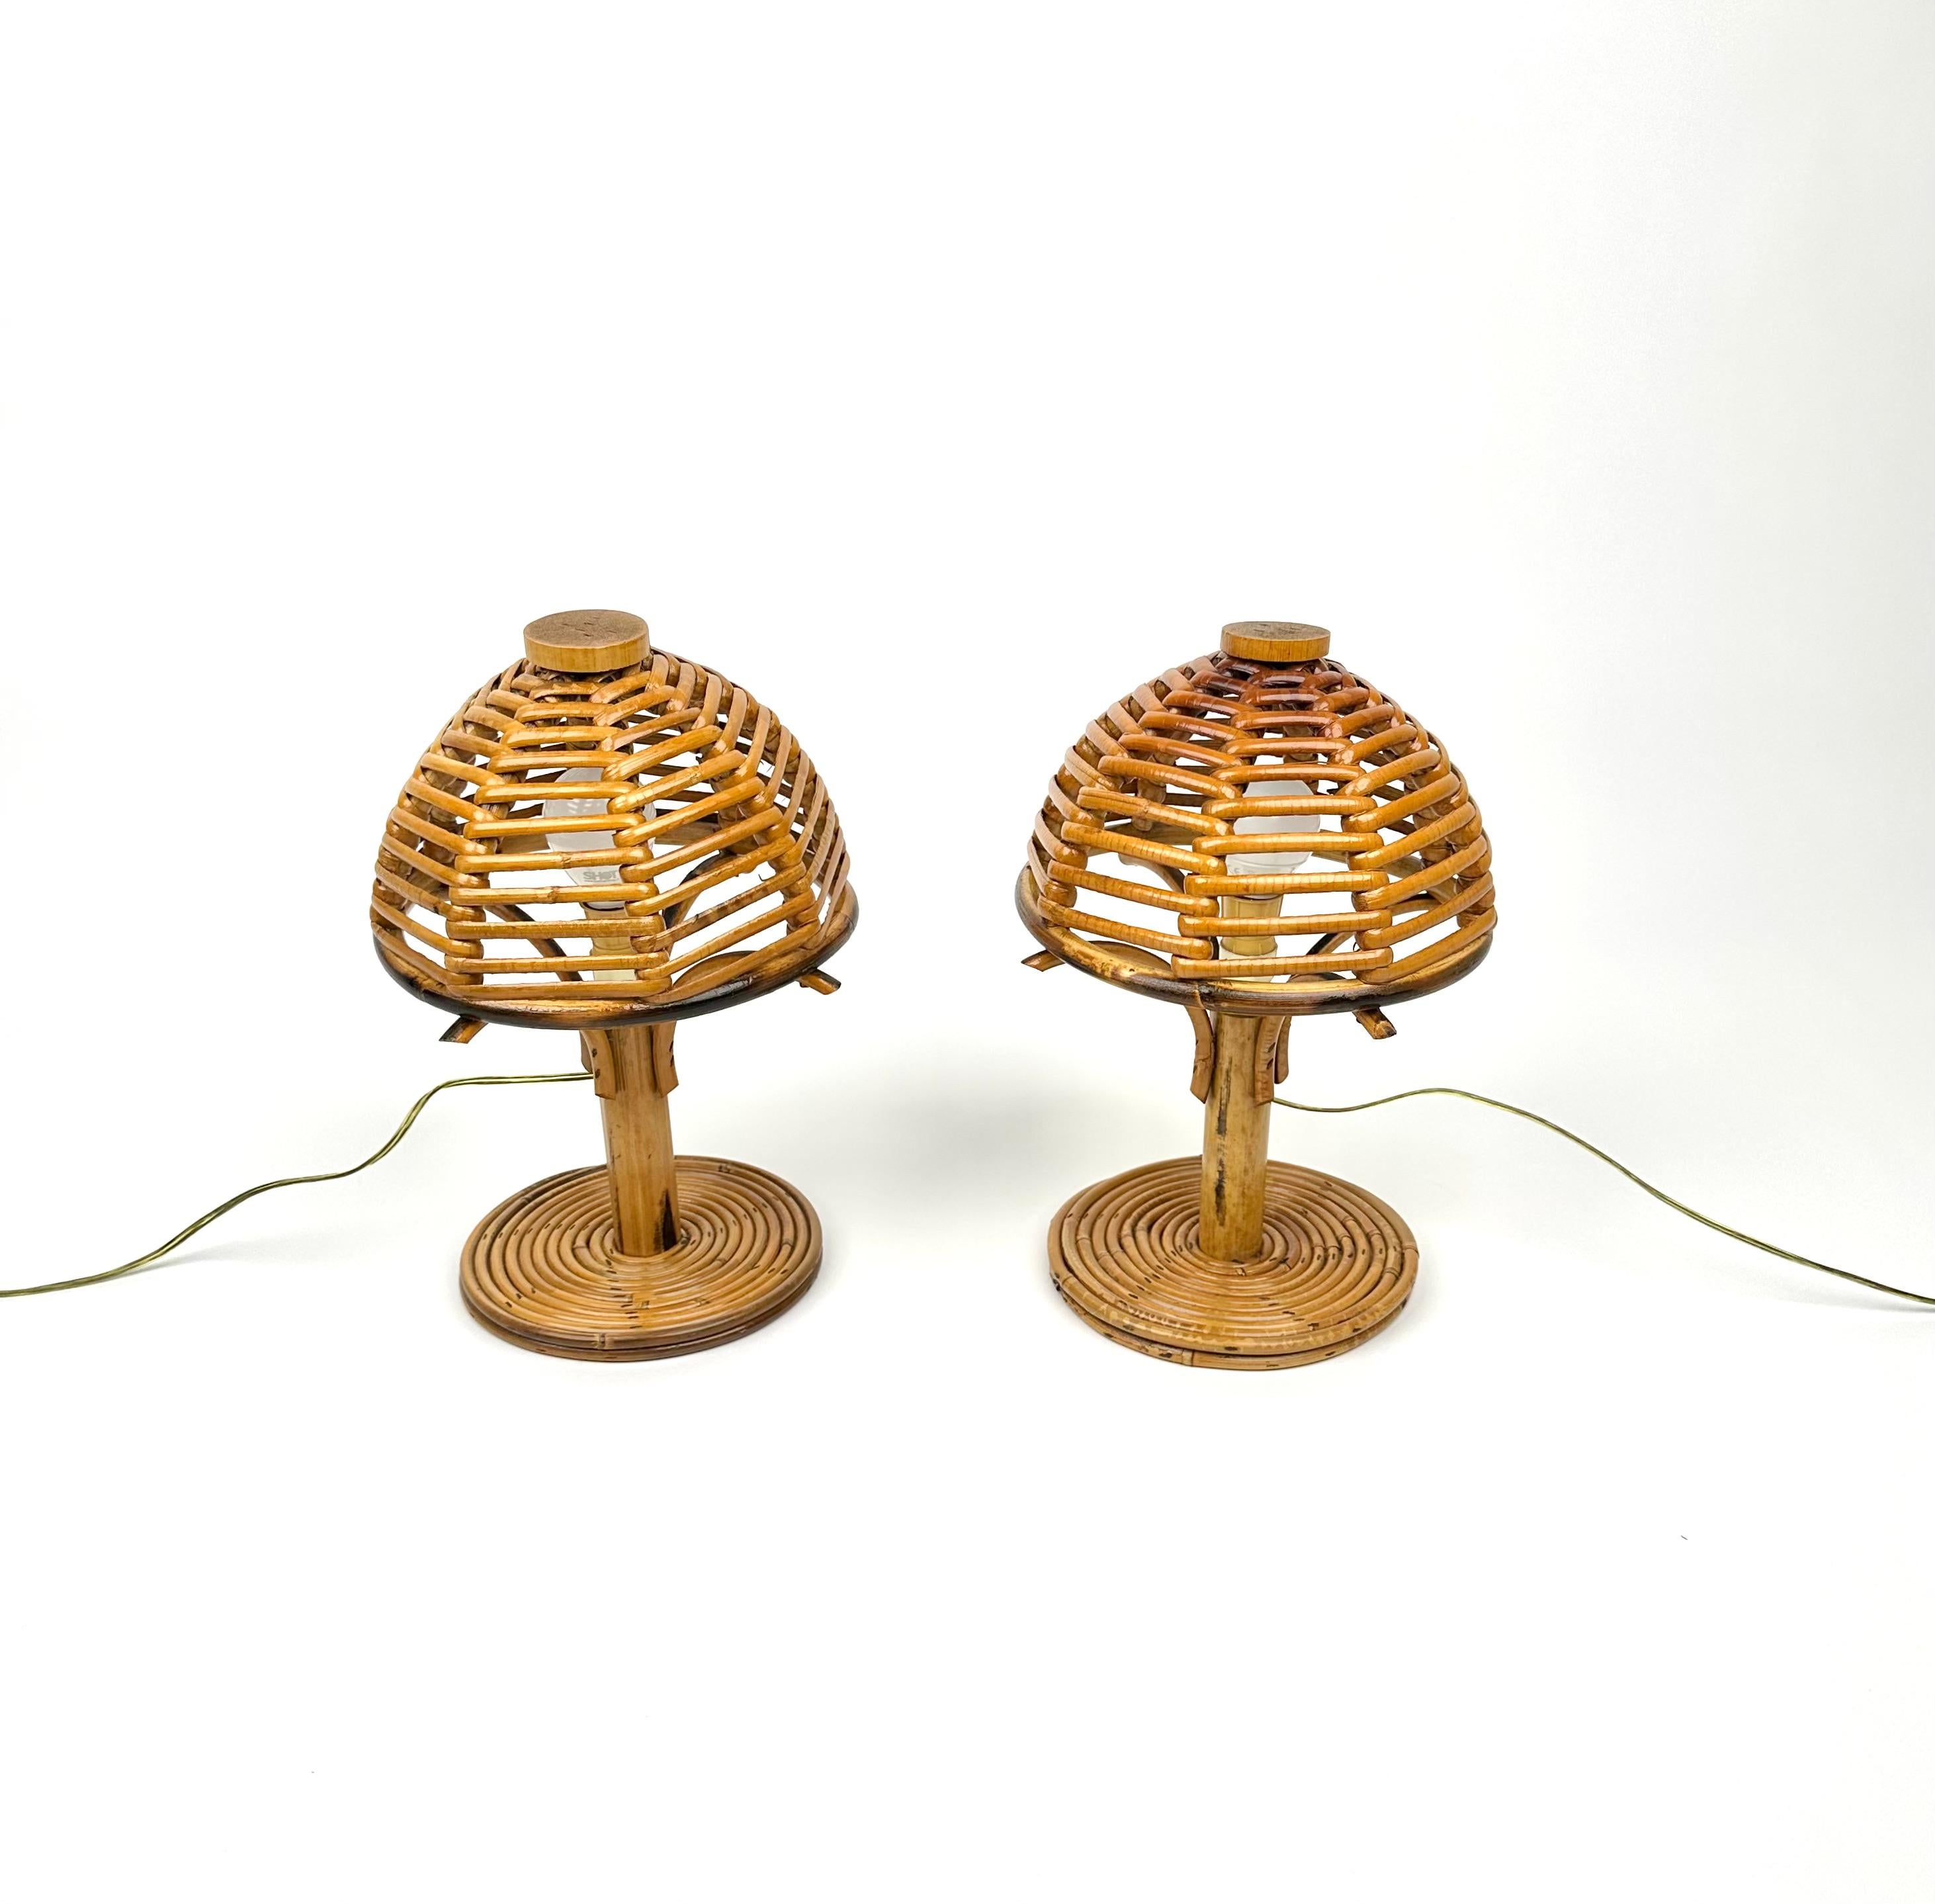 Italian Mid-Century Bamboo and Rattan Pair of Table Lamps Louis Sognot Style Italy 1960s